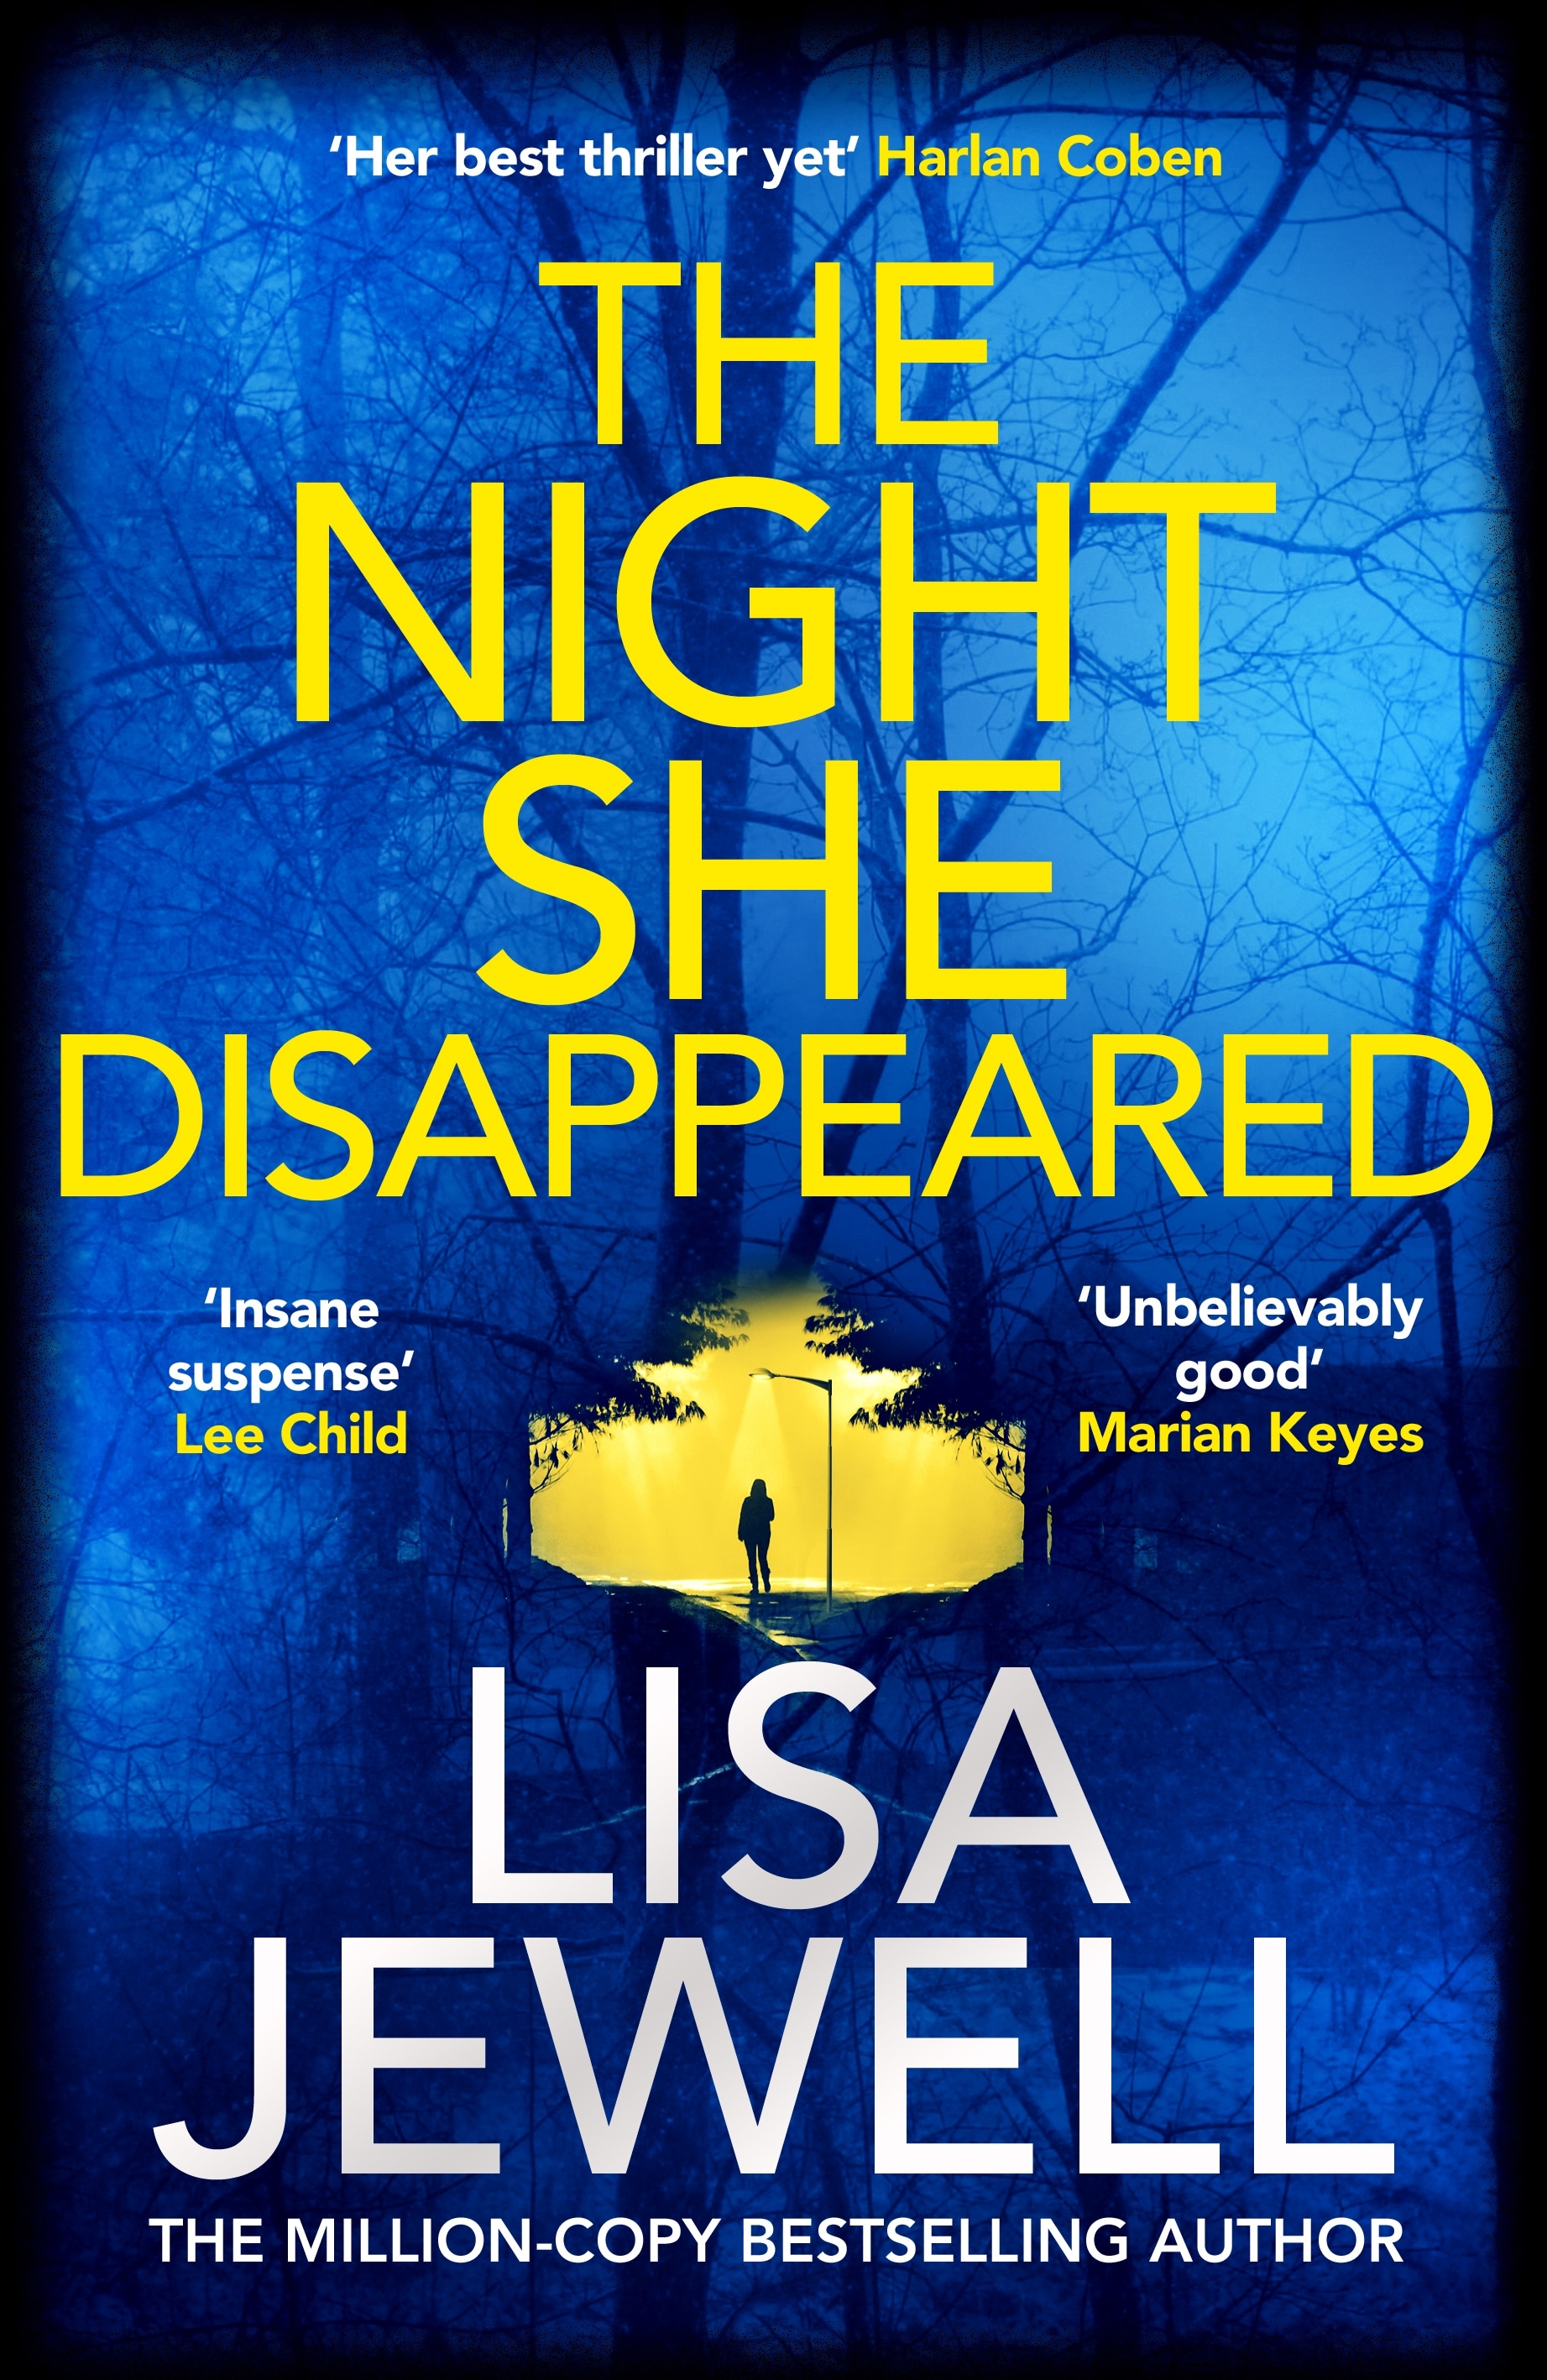 Book “The Night She Disappeared” by Lisa Jewell — July 22, 2021